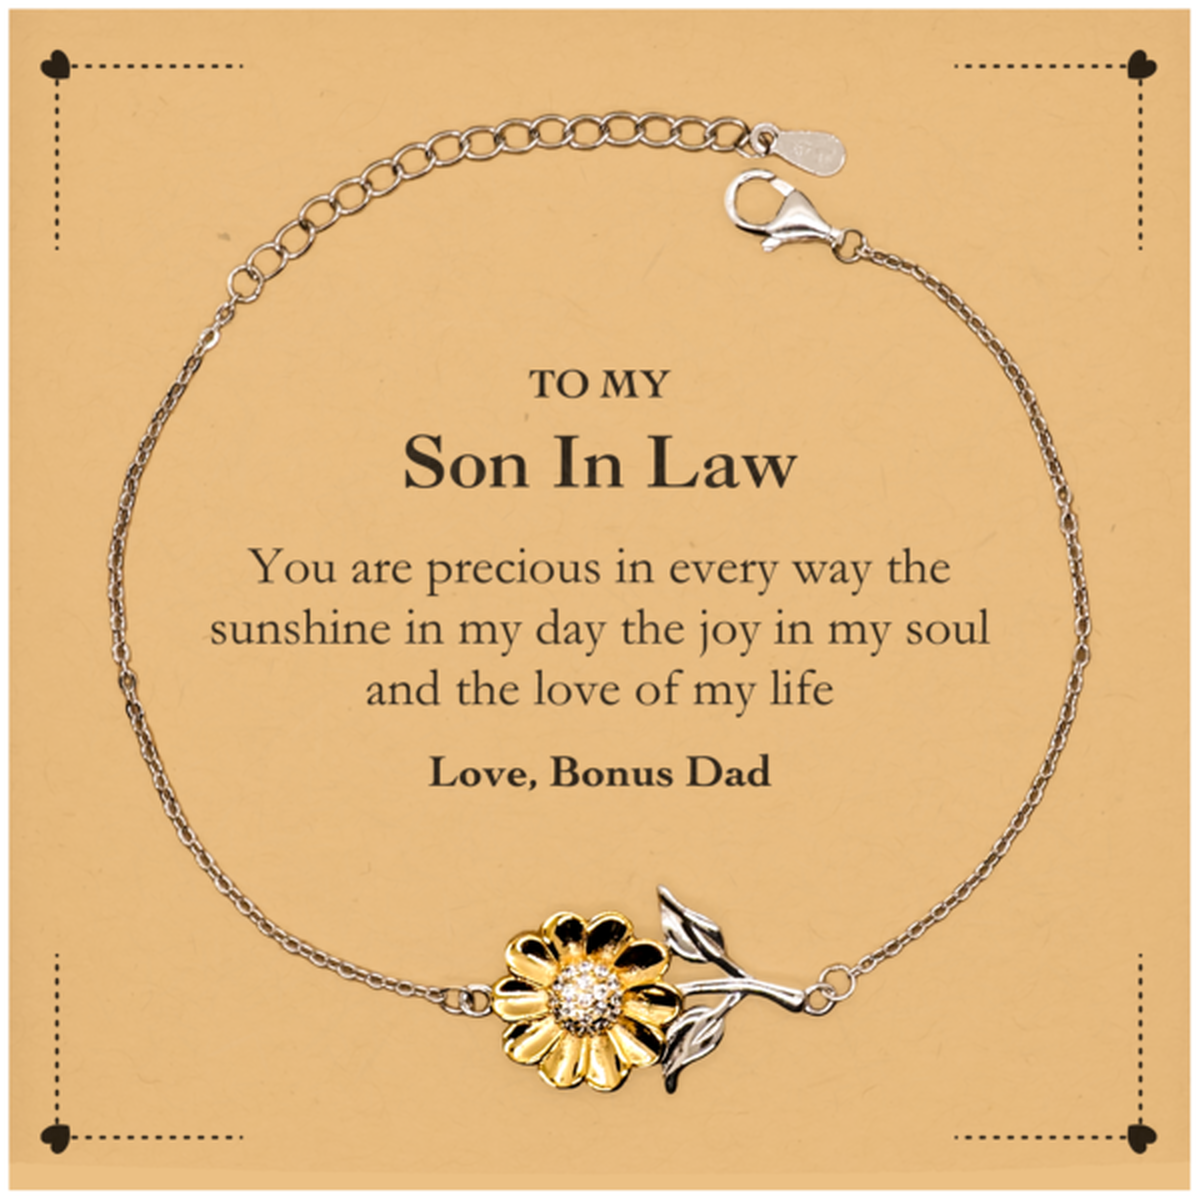 Graduation Gifts for Son In Law Sunflower Bracelet Present from Bonus Dad, Christmas Son In Law Birthday Gifts Son In Law You are precious in every way the sunshine in my day. Love, Bonus Dad